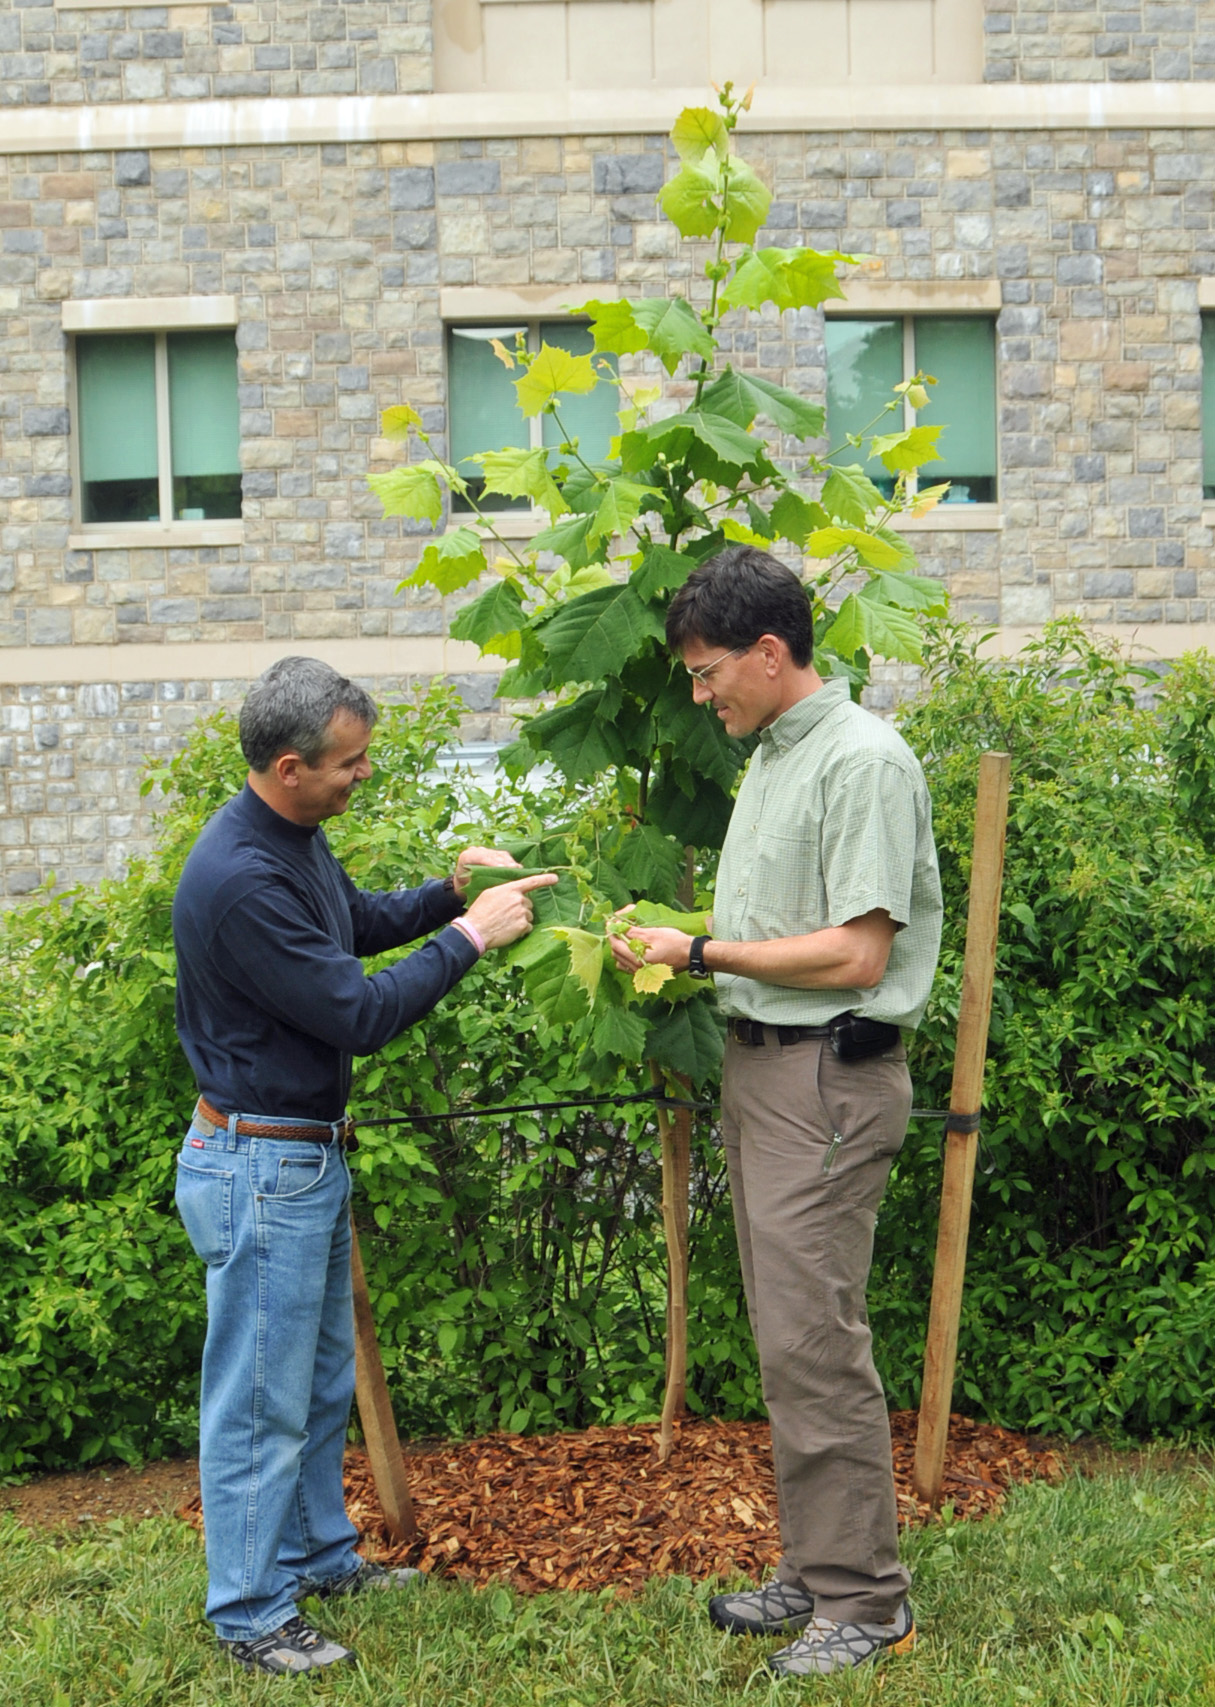 John Seiler and Eric Wiseman standing next to a small tree.